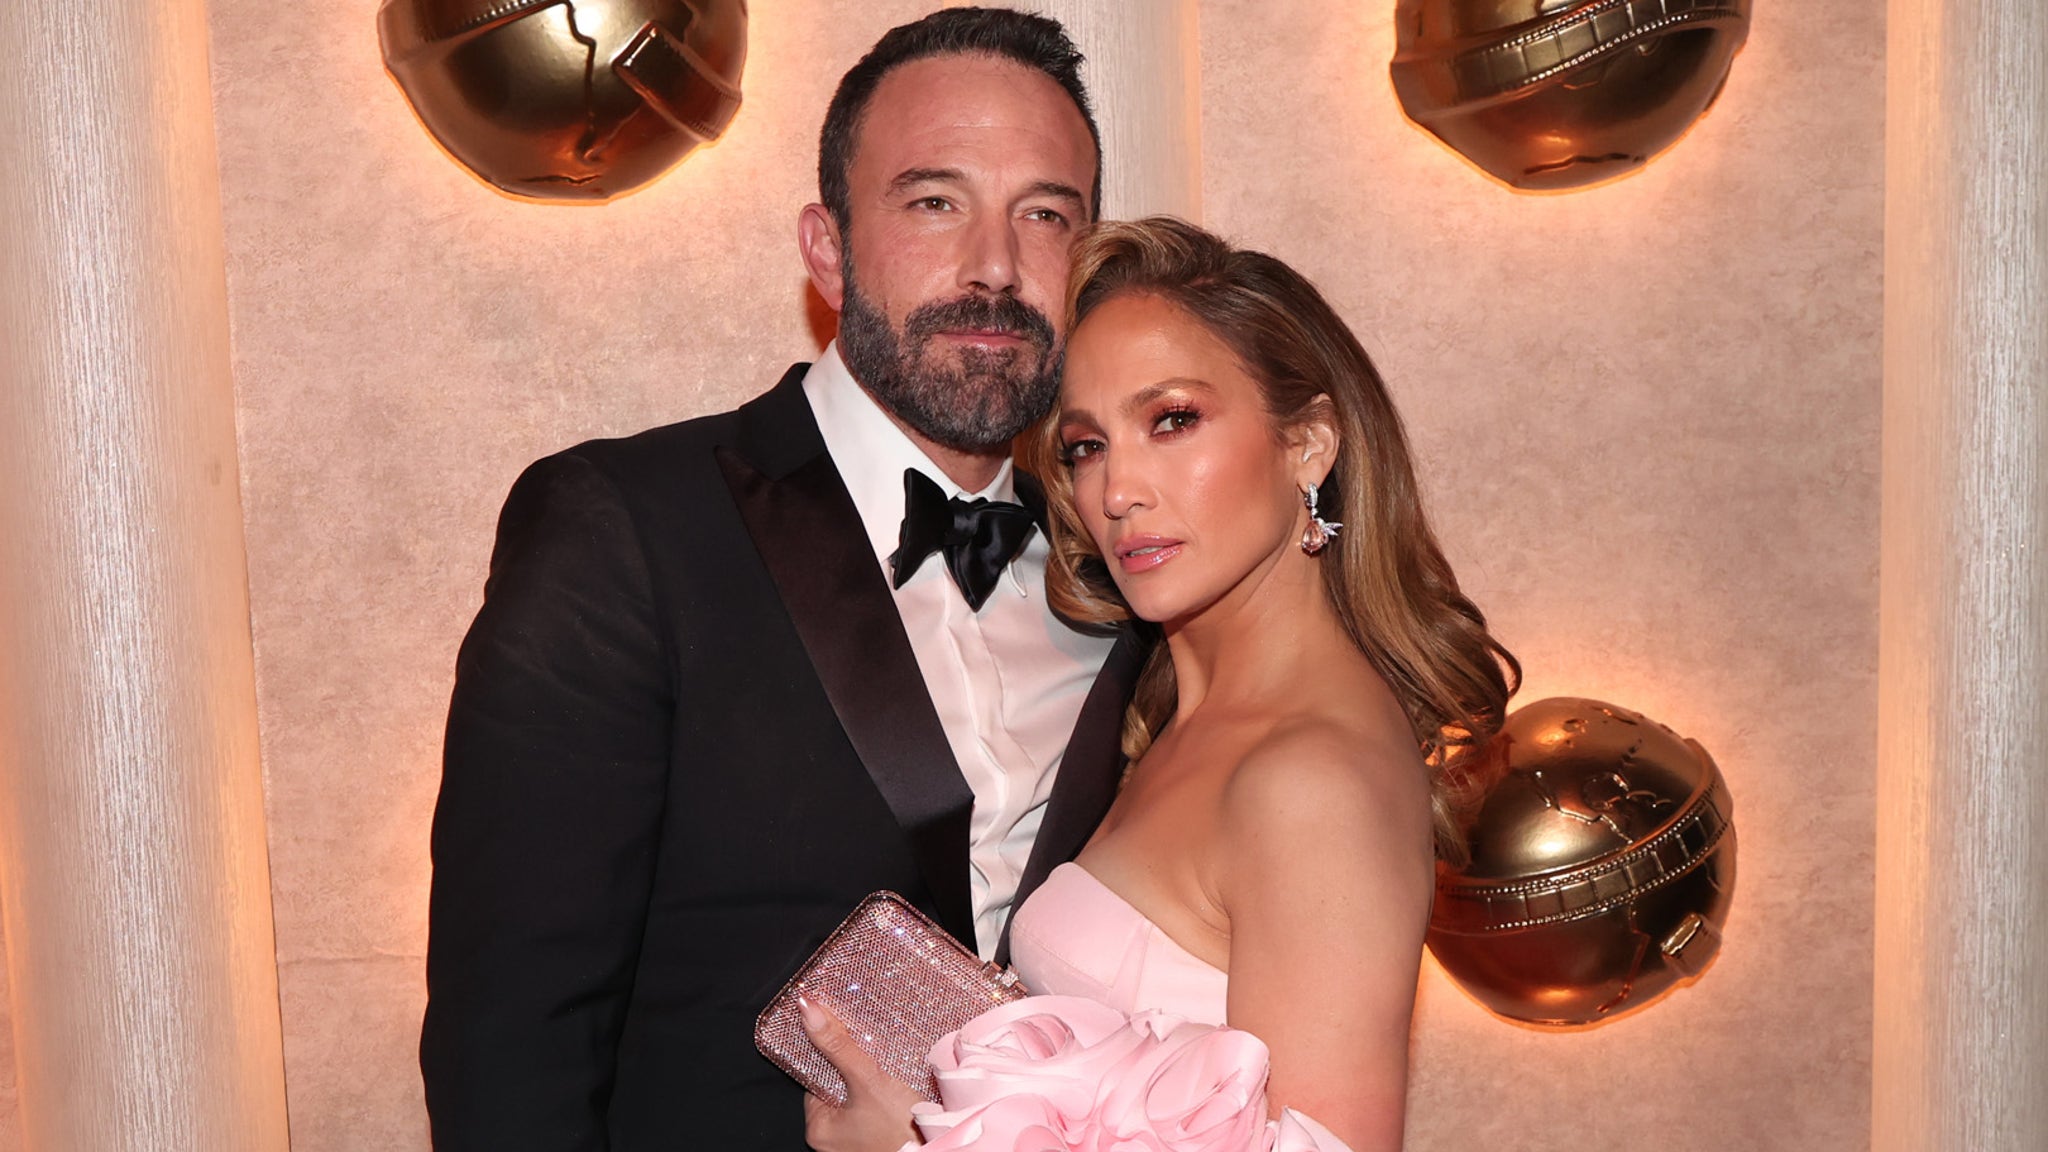 Ben Affleck Was 'Taken Aback' When Jennifer Lopez Passed His Love Letters Around